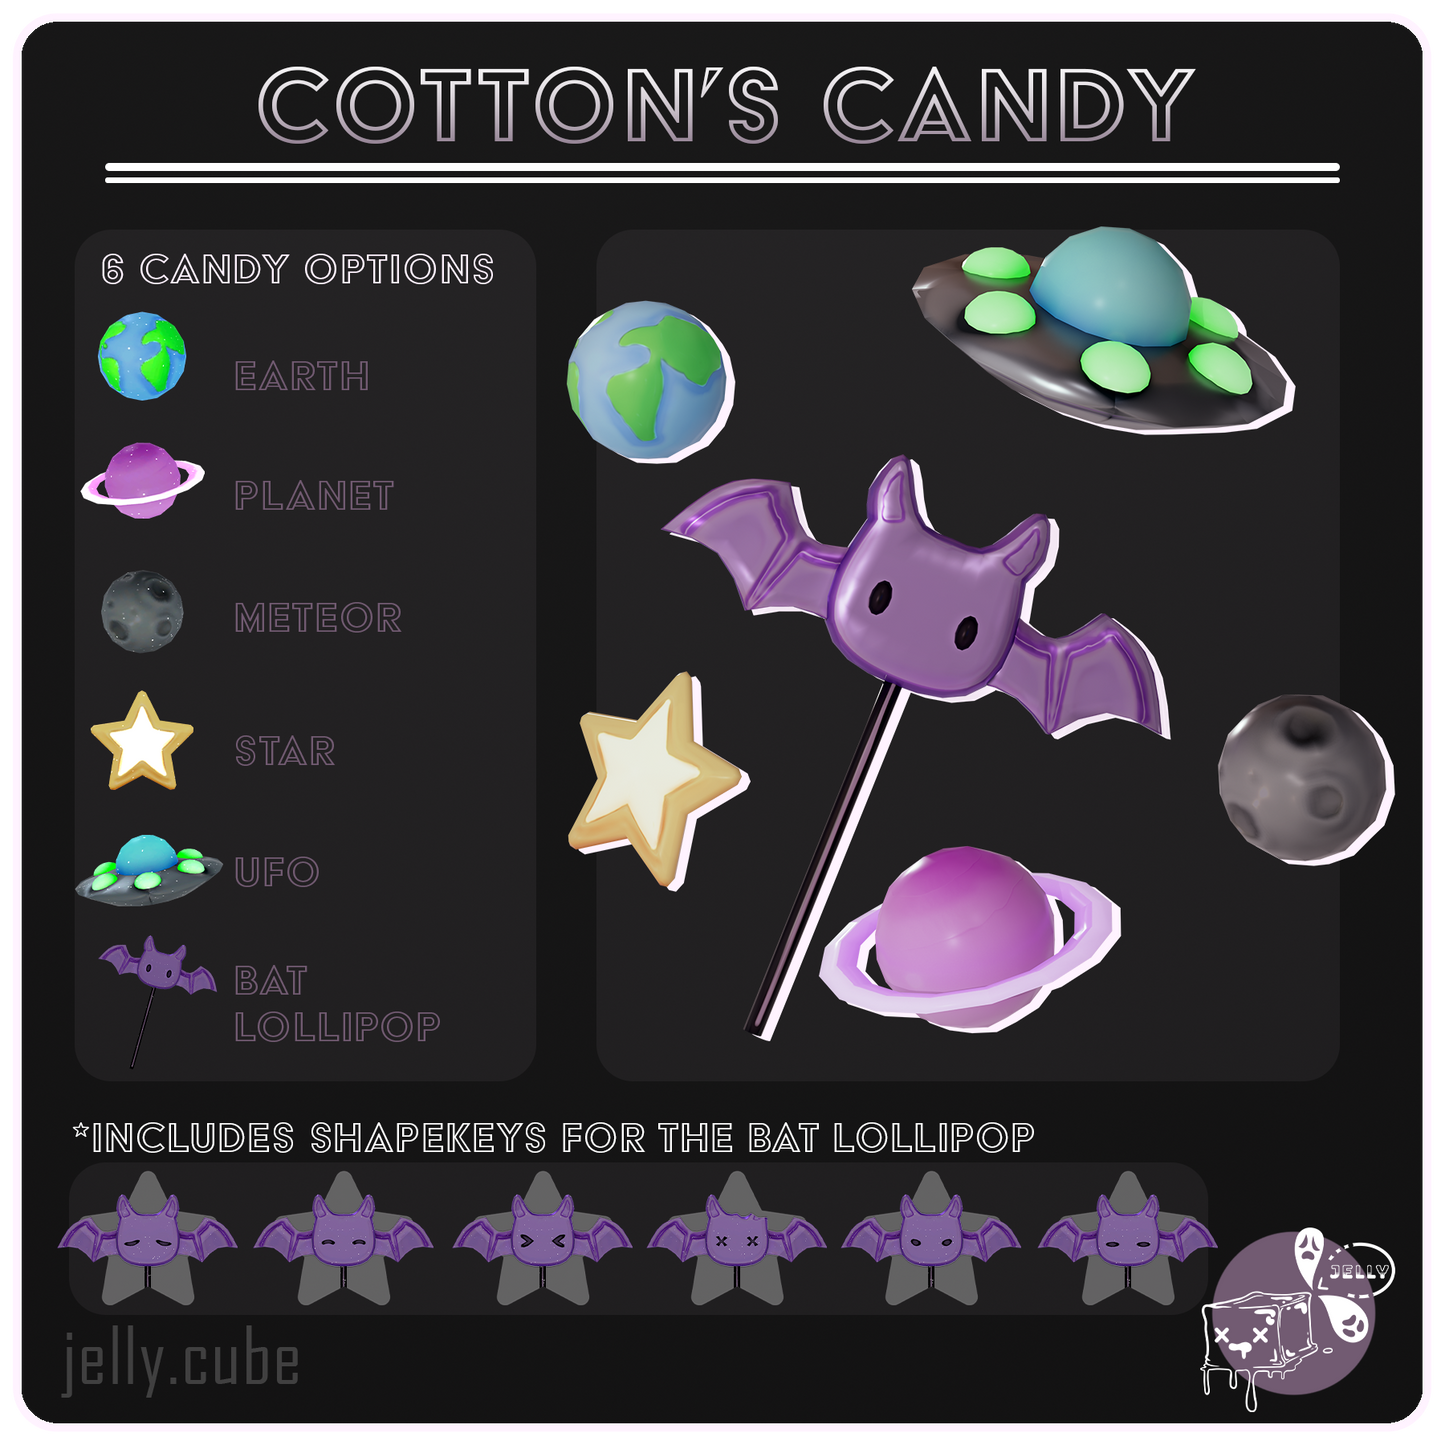 Cotton's Candy